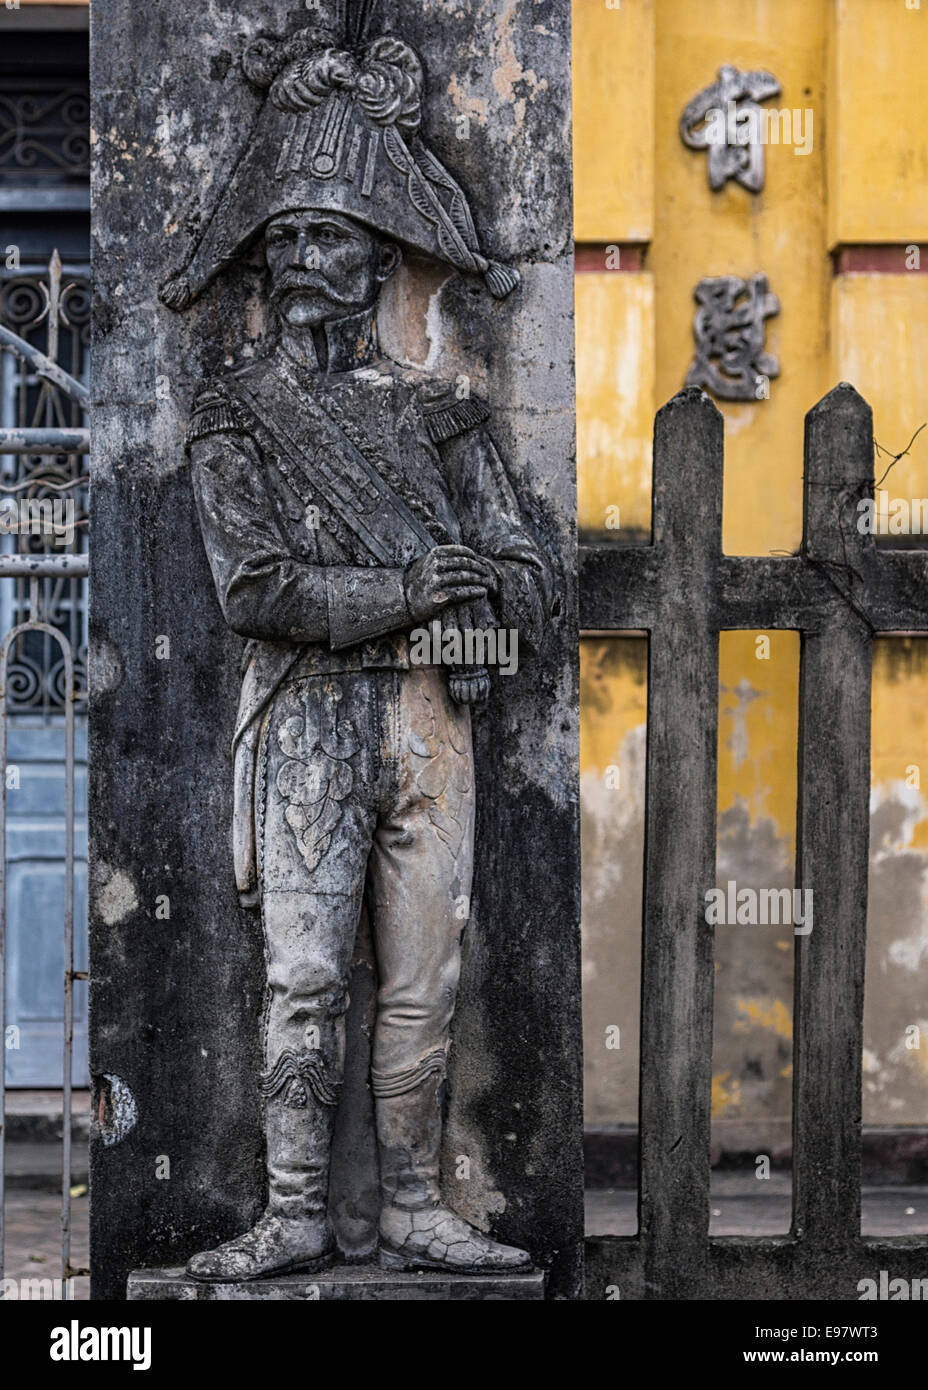 Mural sculpture of colonial French soldier in Vietnam Stock Photo - Alamy